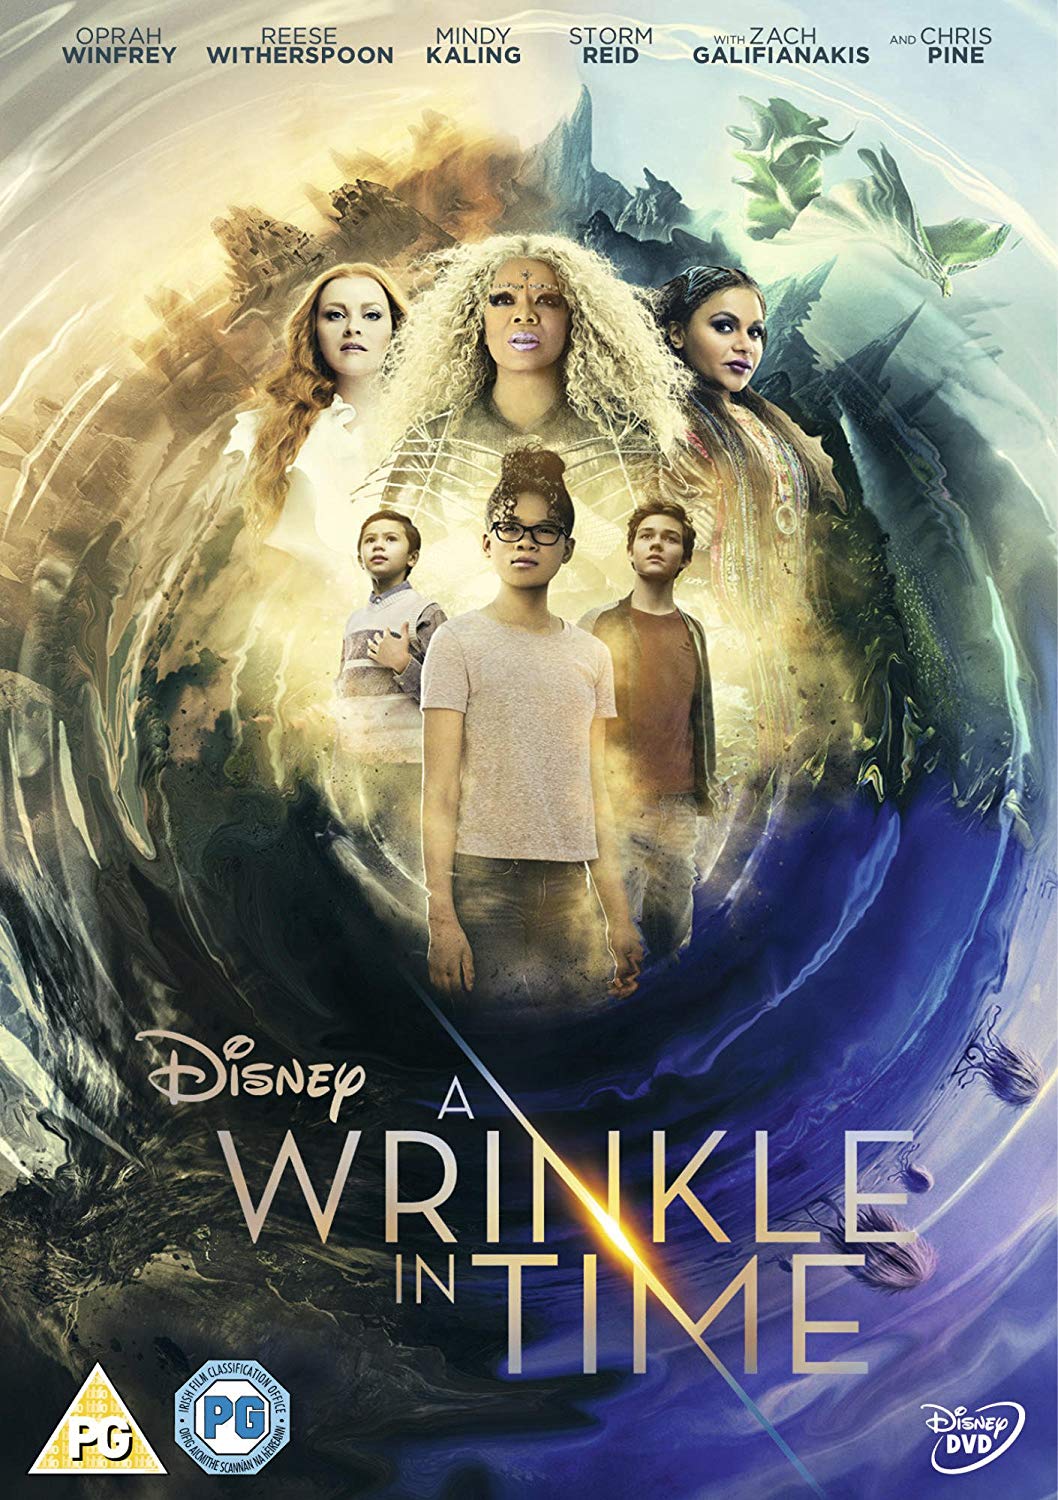 boom competitions - win A Wrinkle in Time on DVD